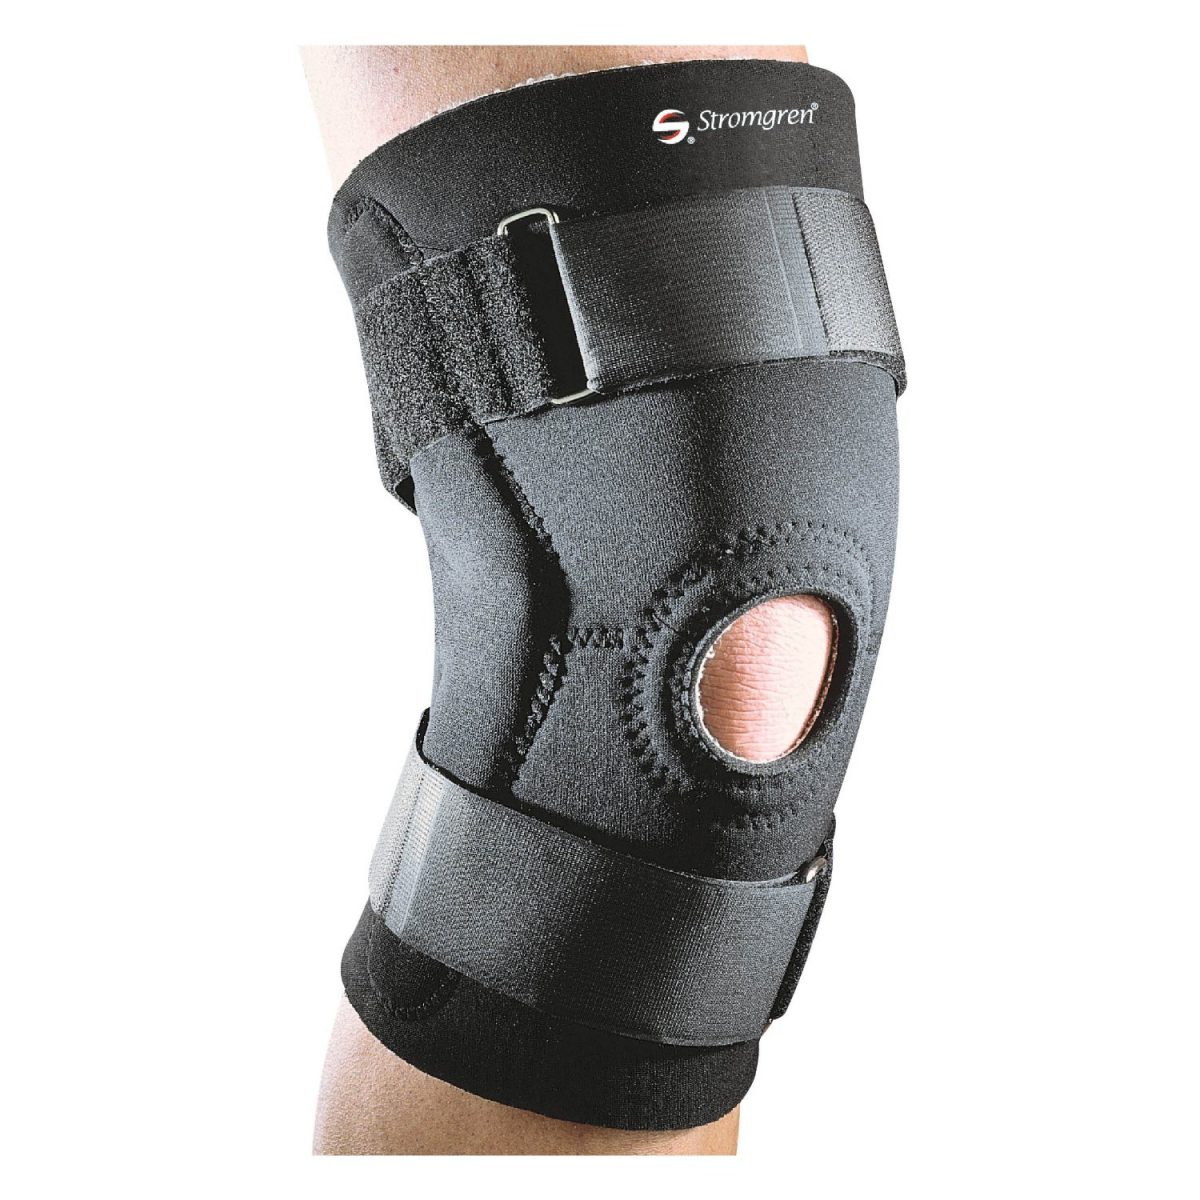 How to Get the Best One? Special Report on Neoprene Knee Braces ...